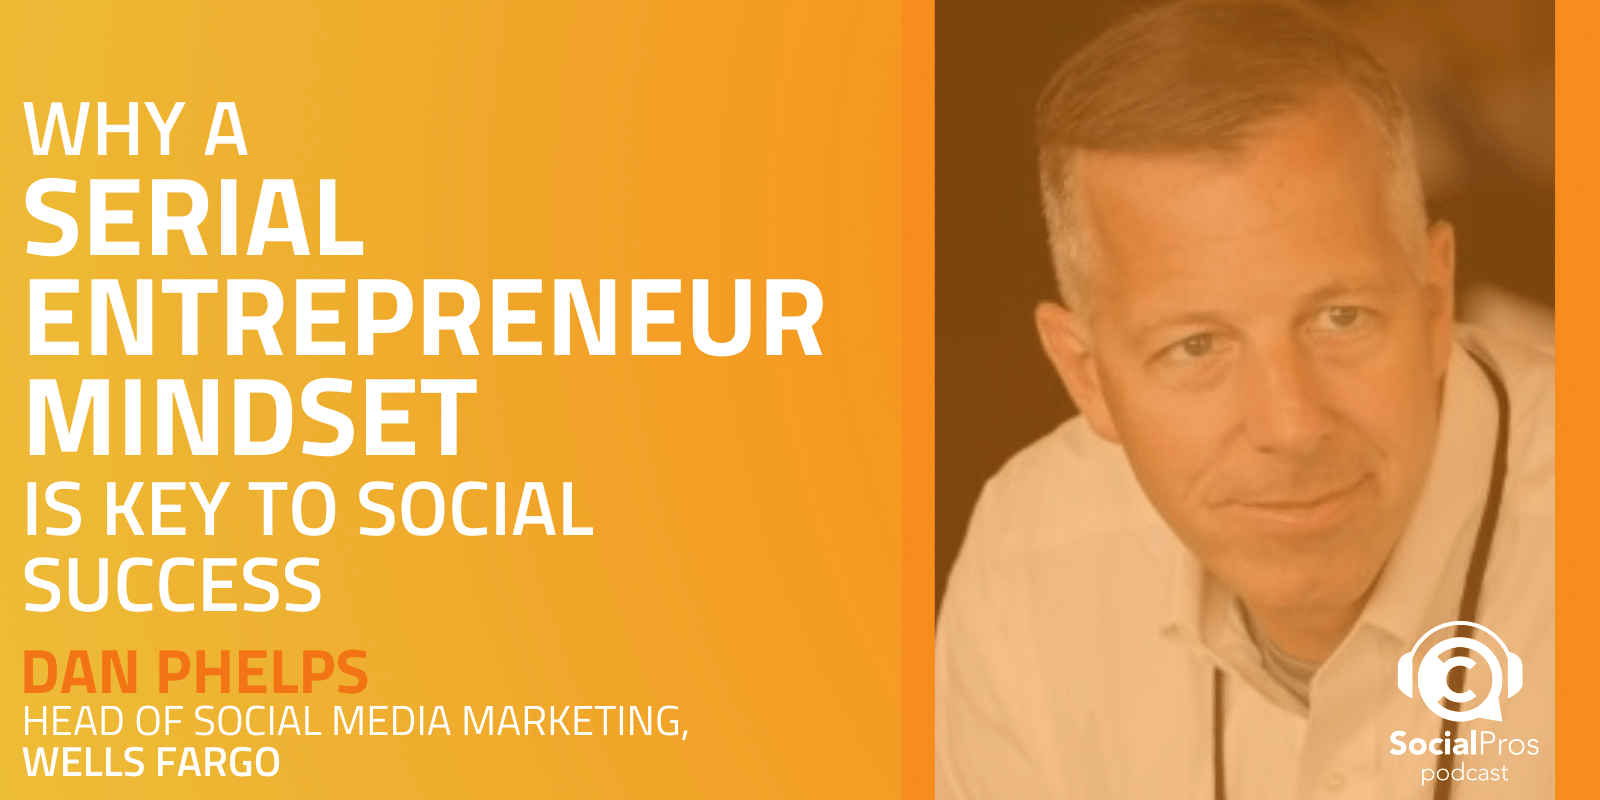 Why a Serial Entrepreneur Mindset is Key to Social Success